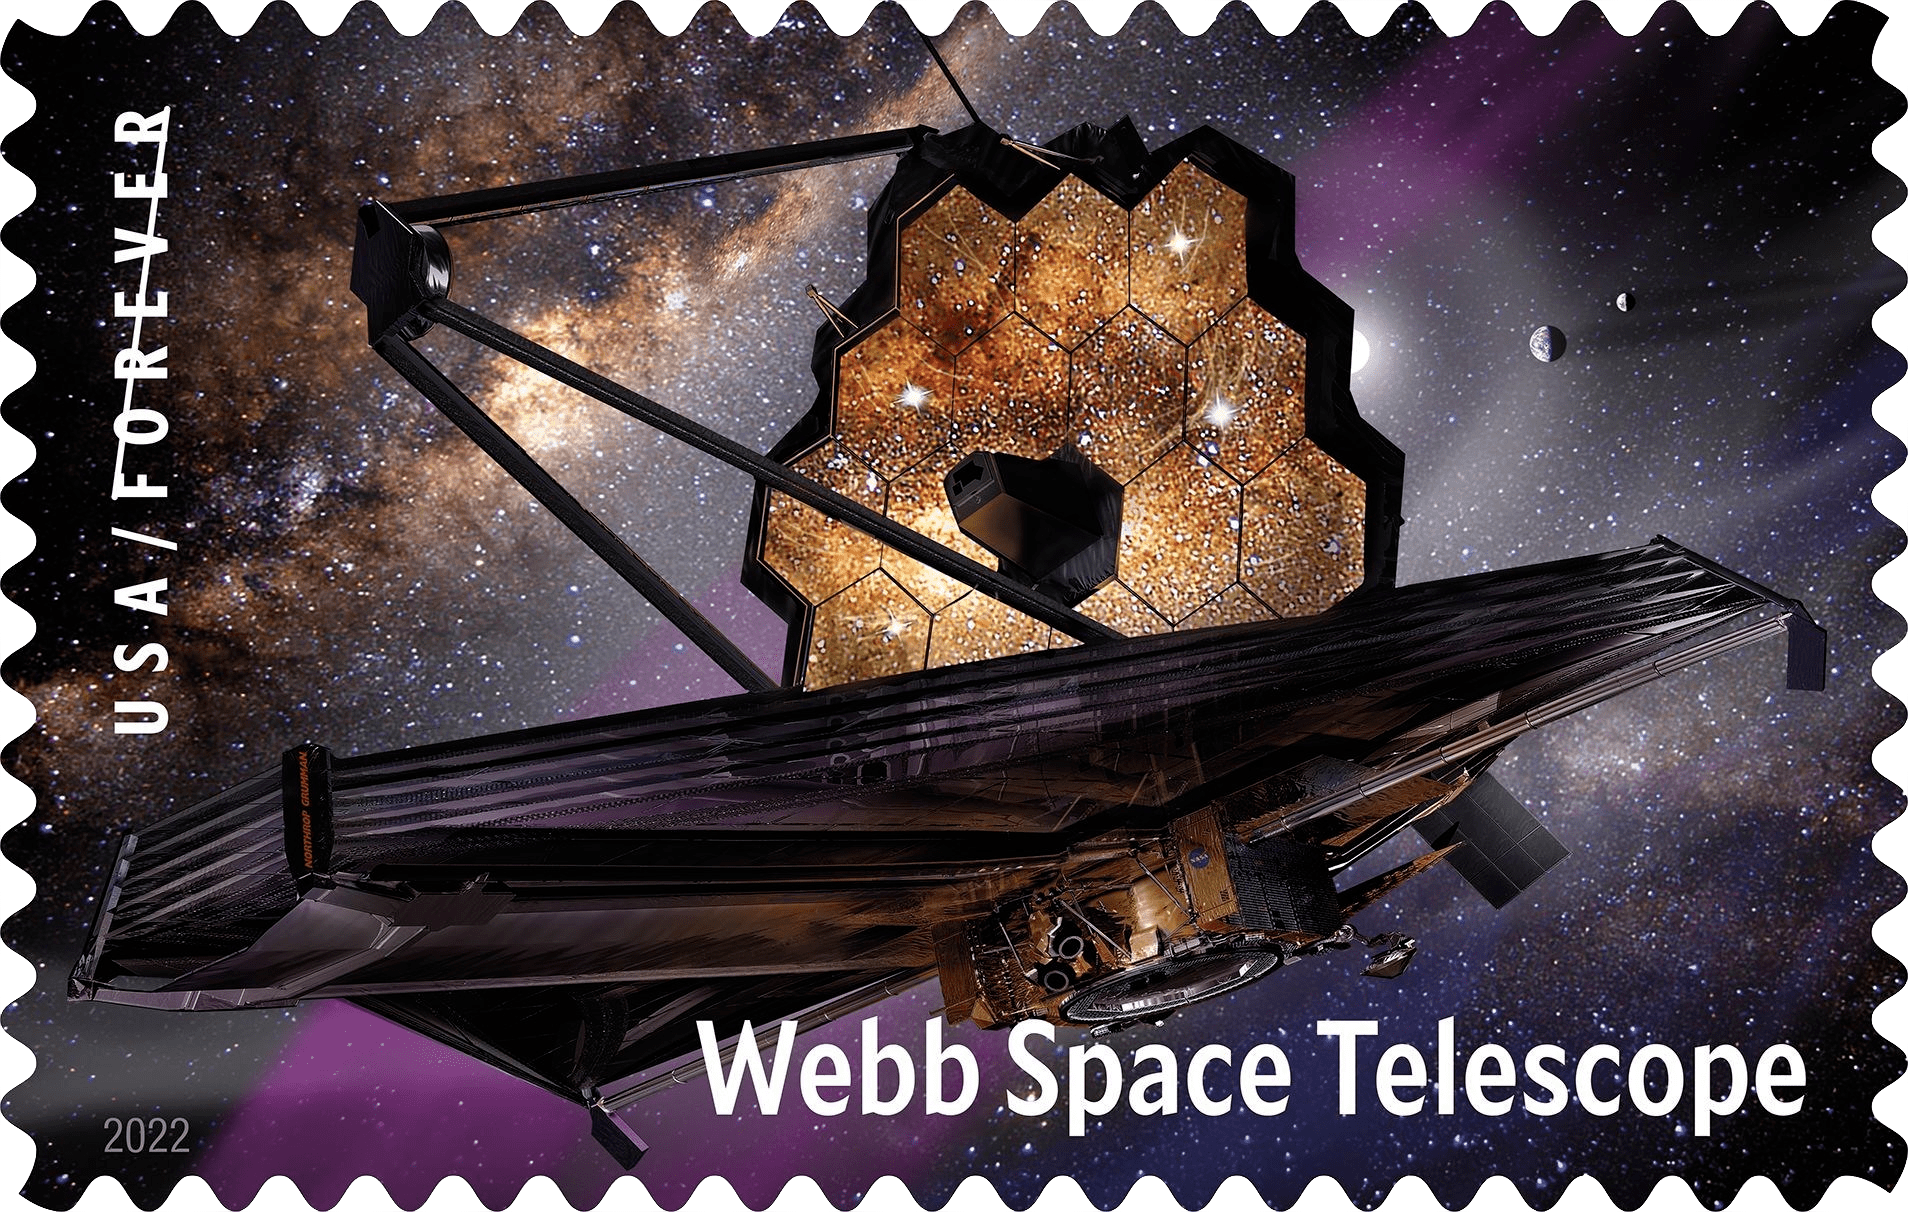 The U.S. Postal Service will issue a stamp highlighting NASA’s James Webb Space Telescope on Sept. 8, 2022.